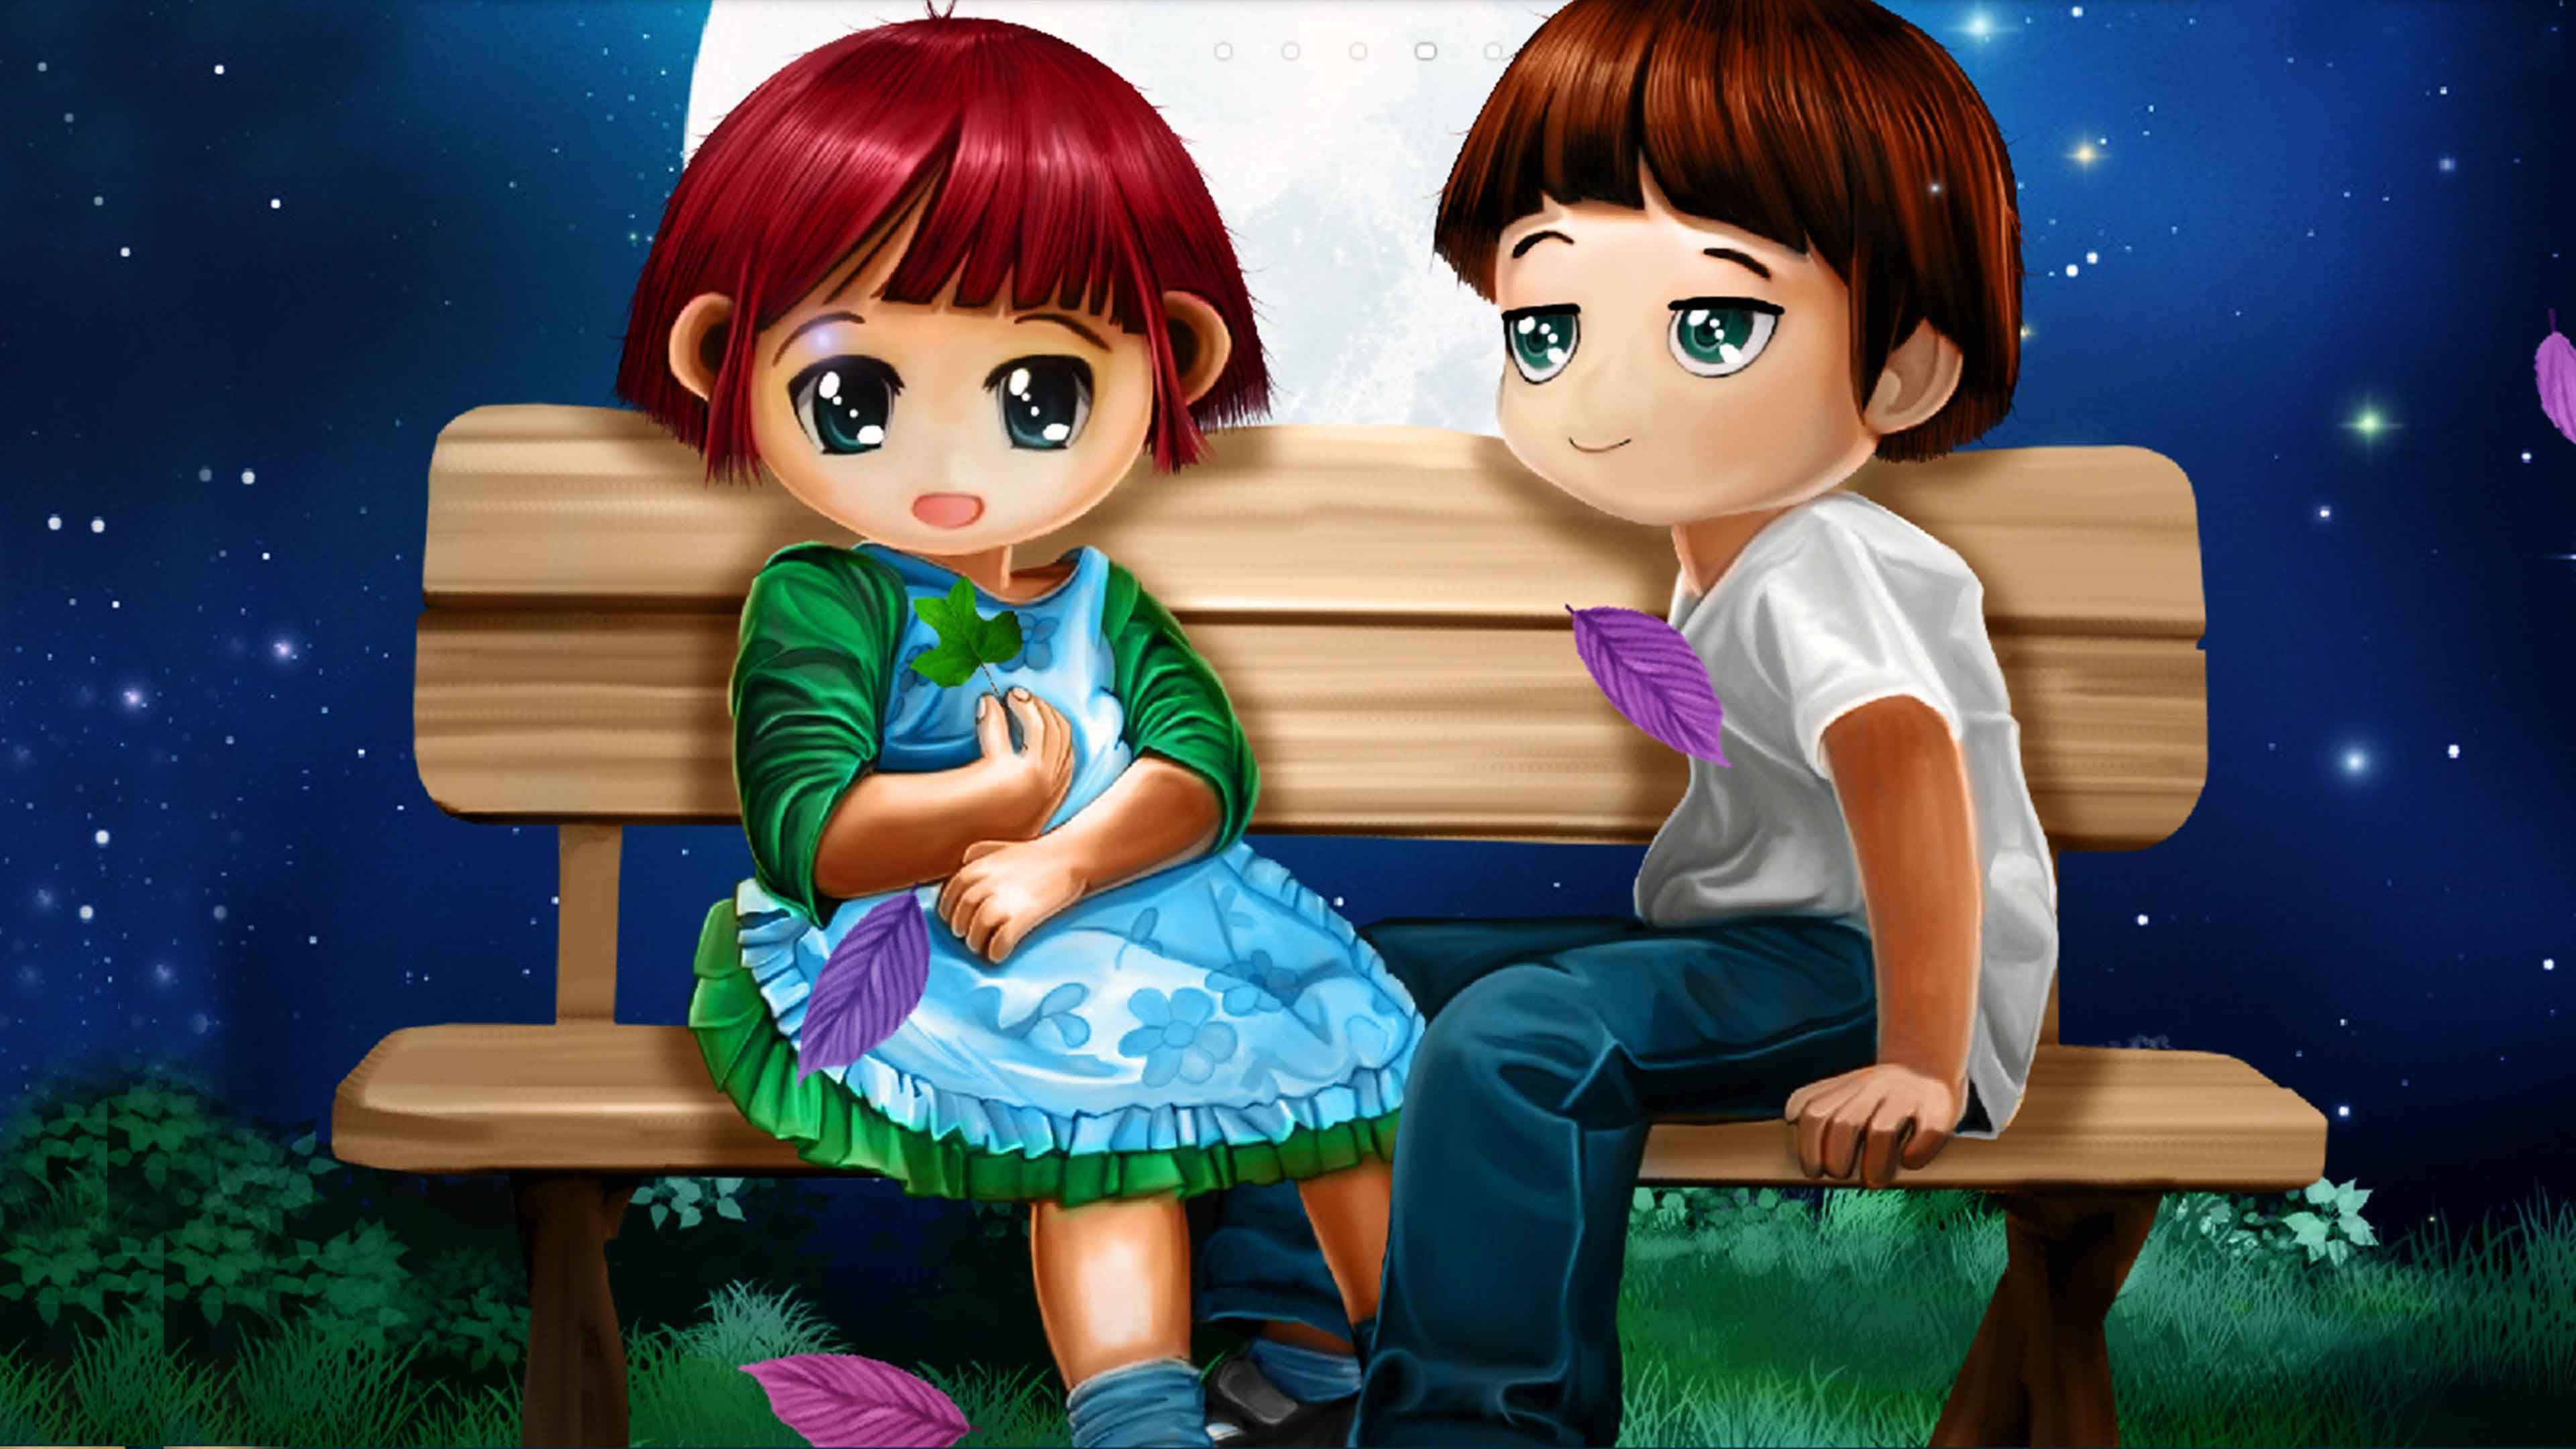 Cute Couple Cartoon Wallpapers Wallpapers